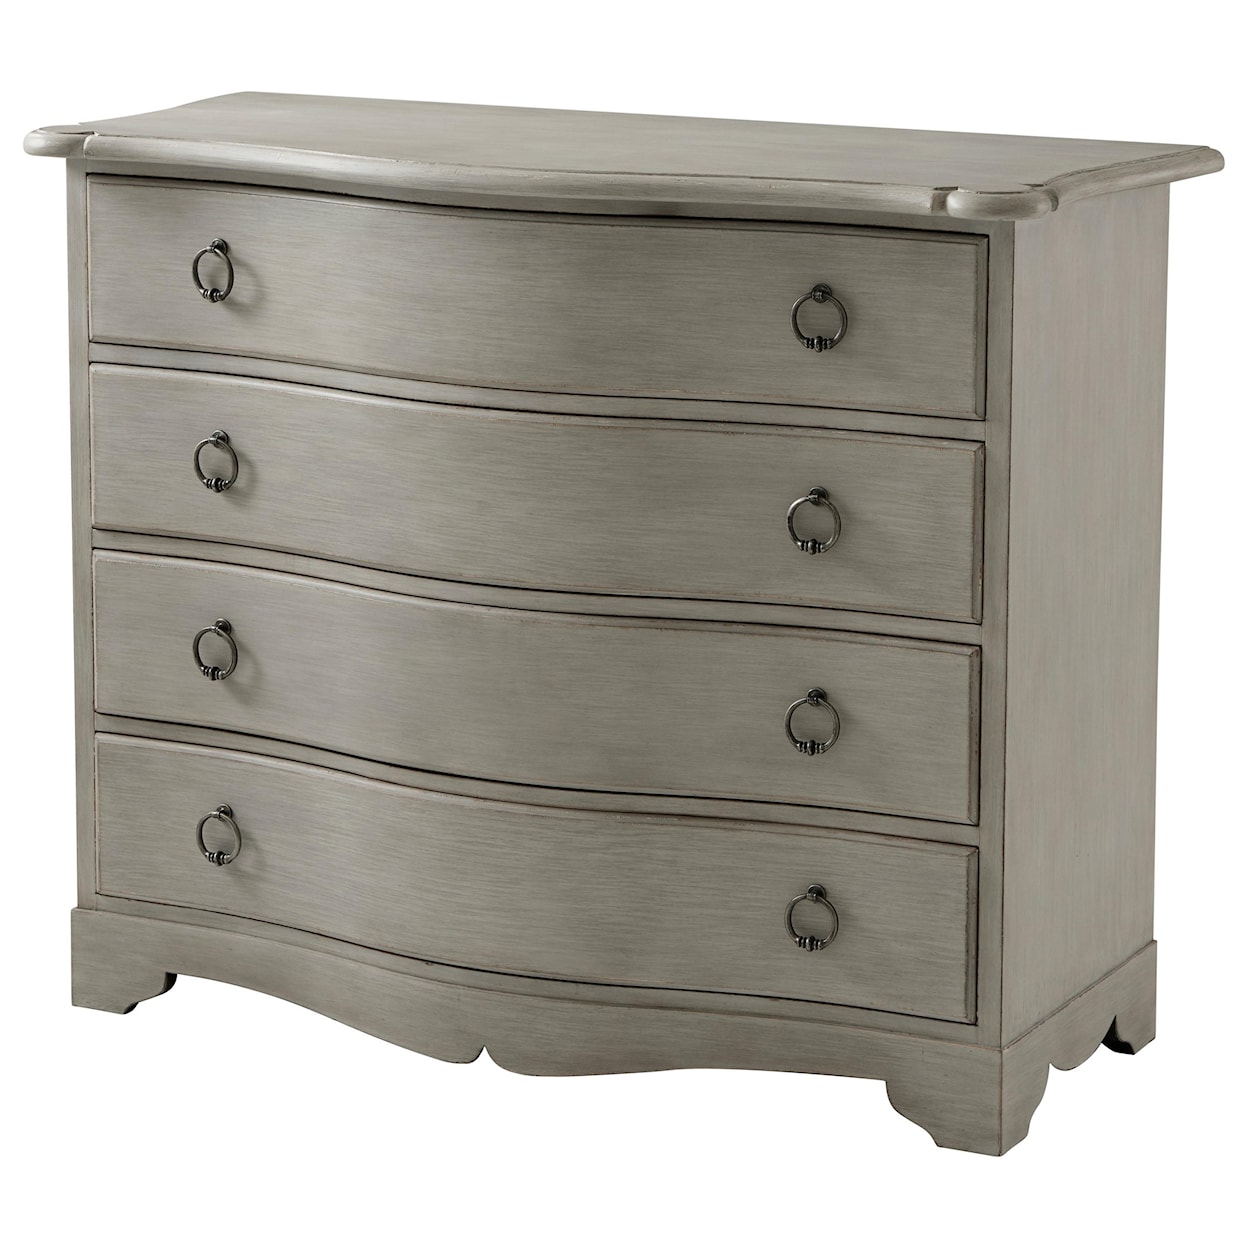 Theodore Alexander The Tavell Collection Four Drawer Chest